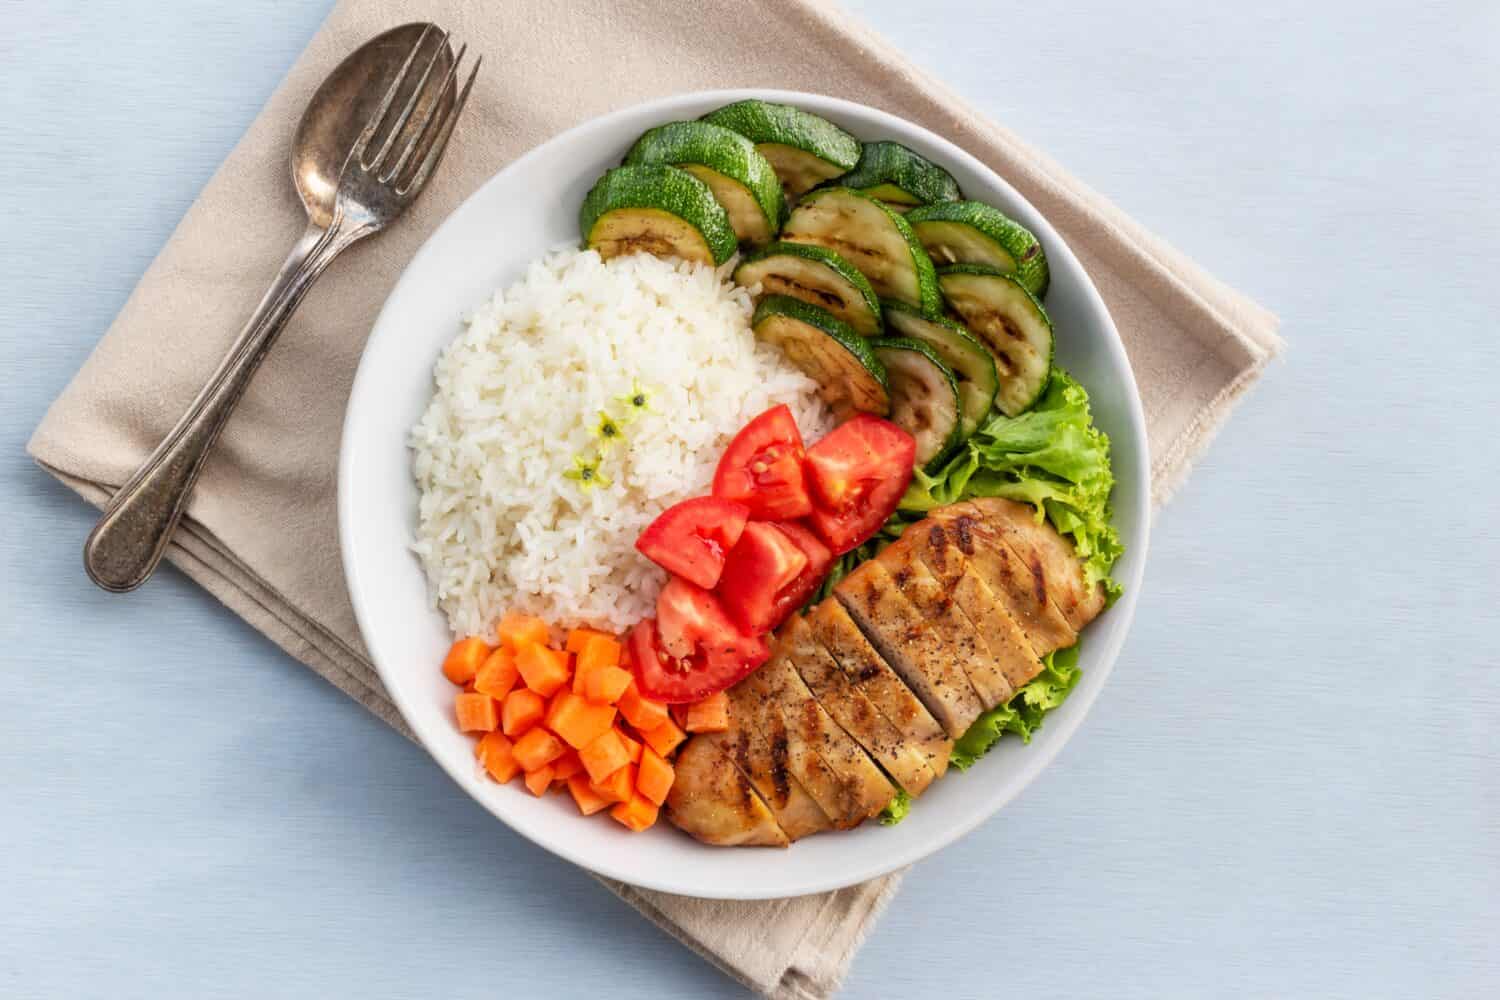  Grilled chicken has rice and zucchini carrot tomato in plate on wood background, top view, healthy food concept.